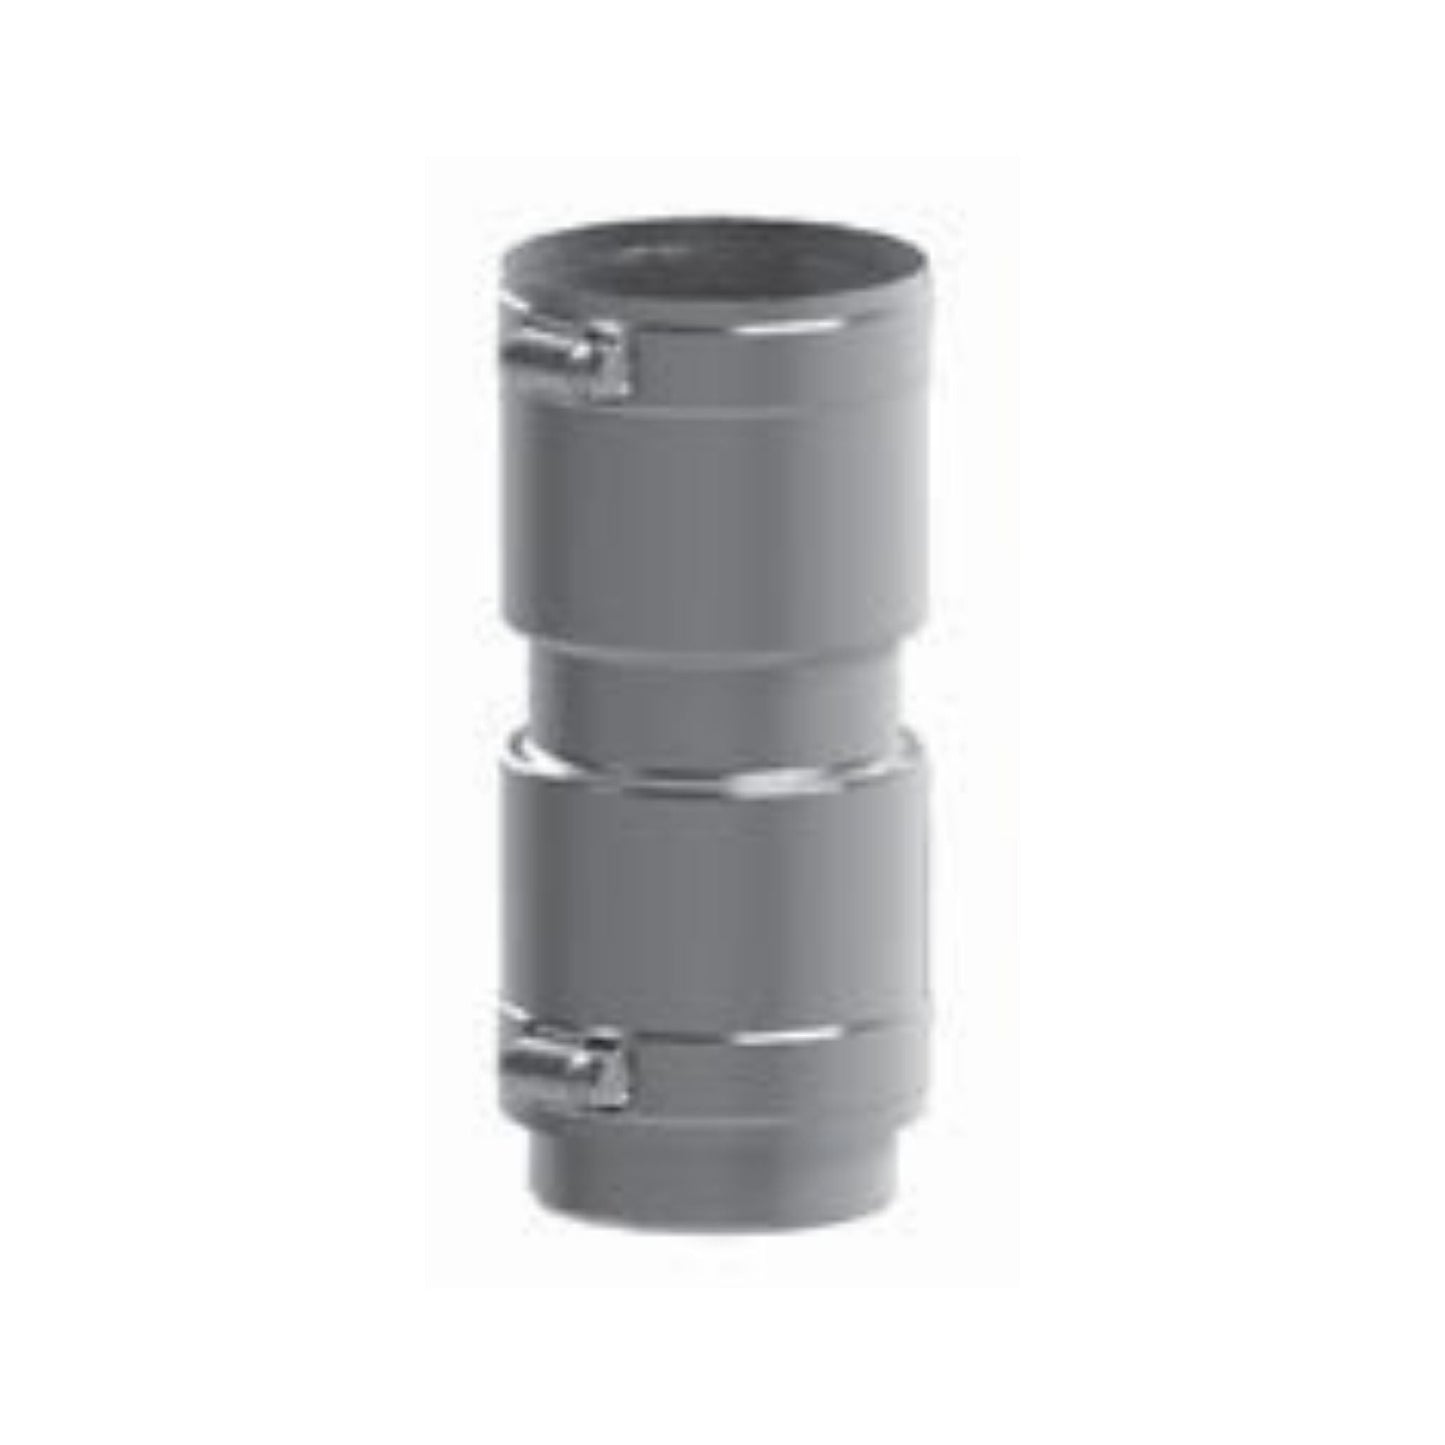 DuraVent FasNSeal Flex 2" 316L Stainless Steel Coupler